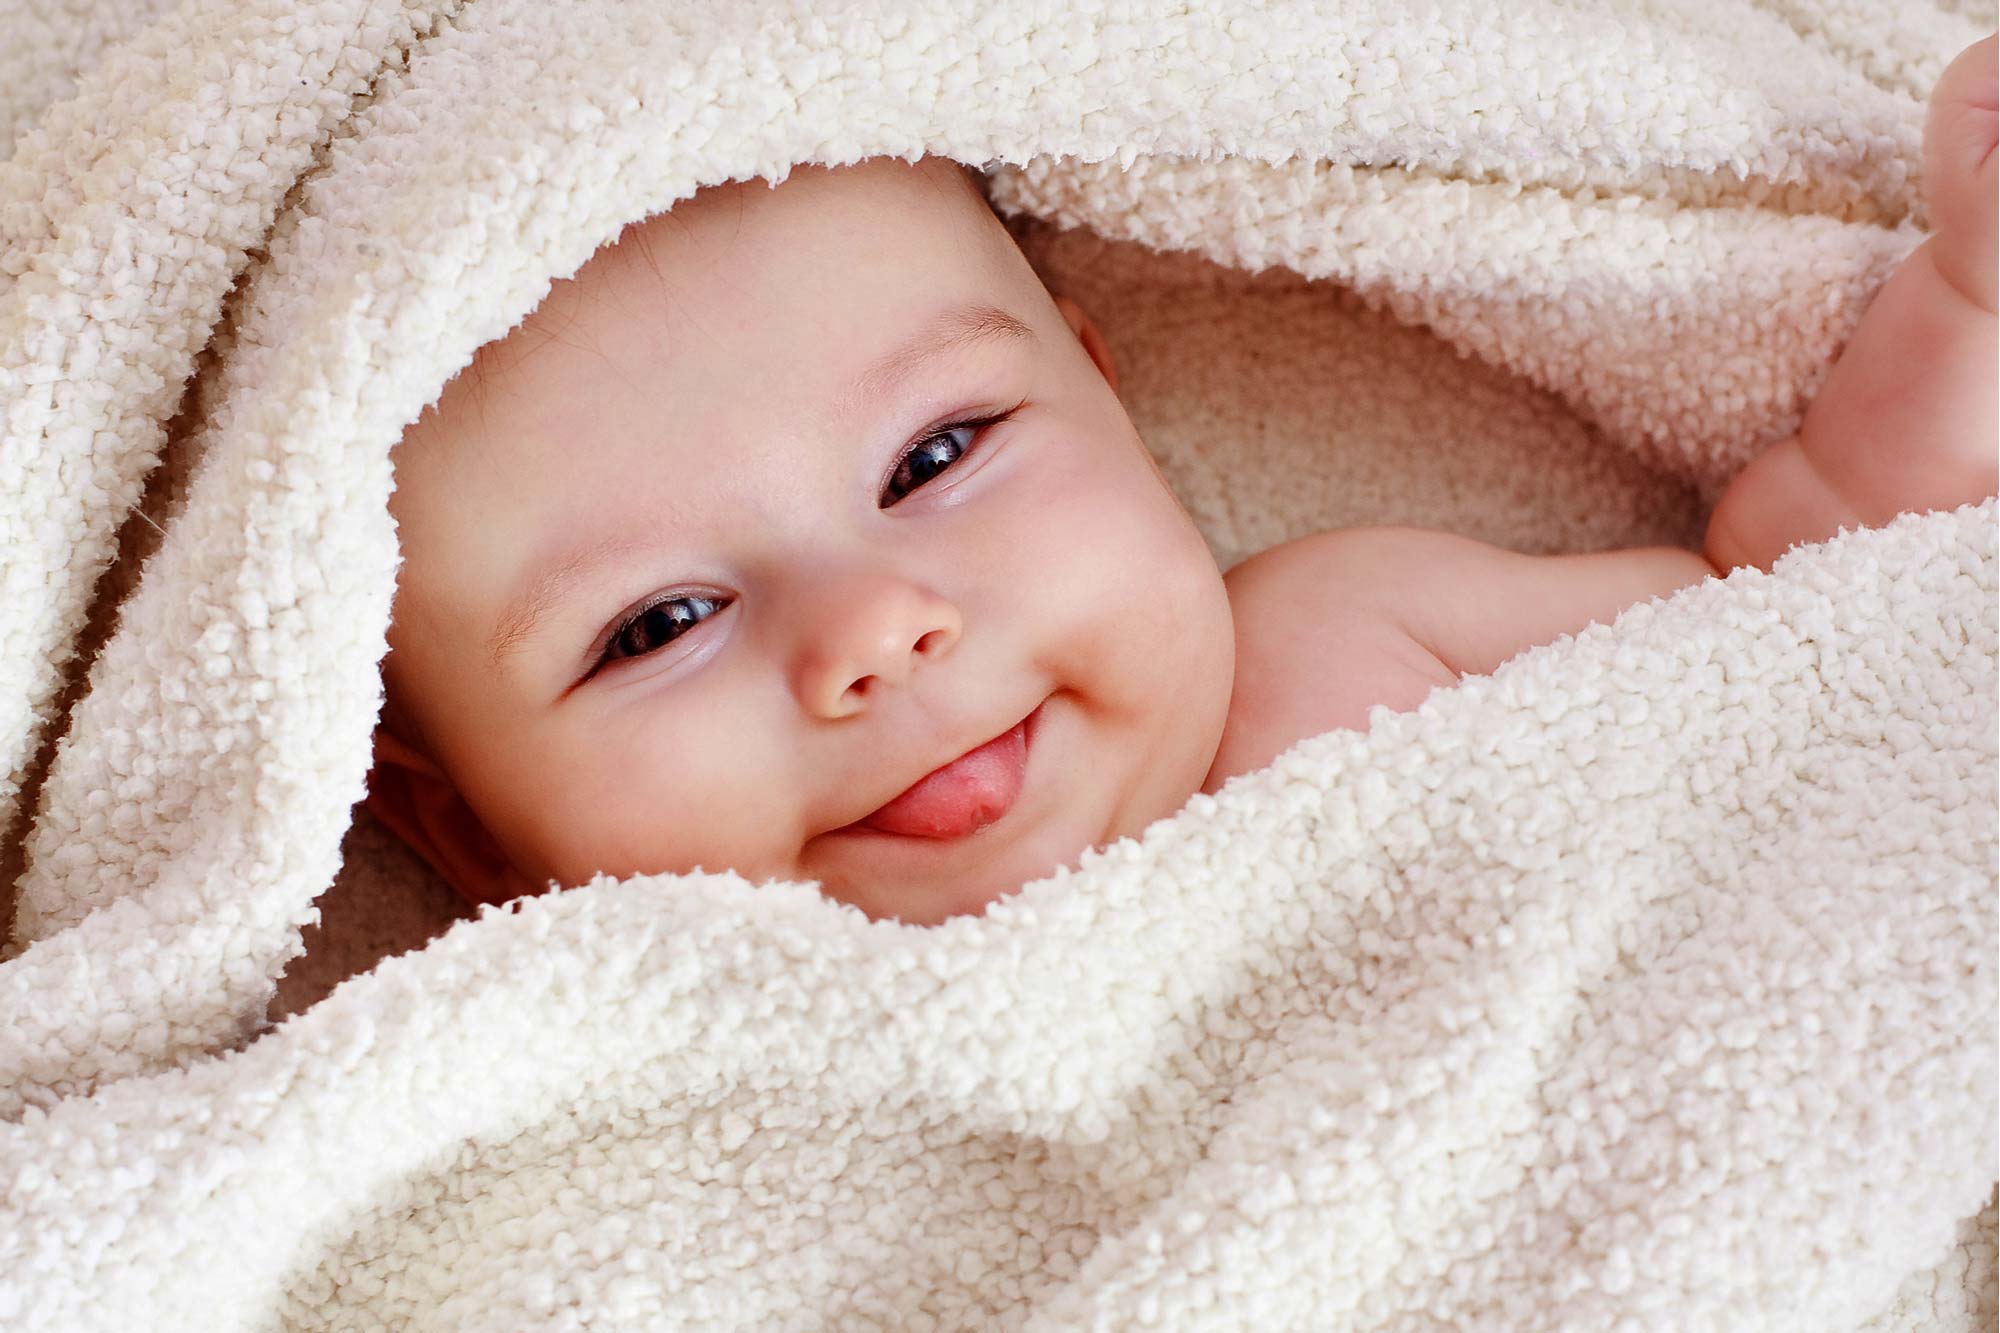 Is It Necessary to Shave Newborn's Hair? | About Islam